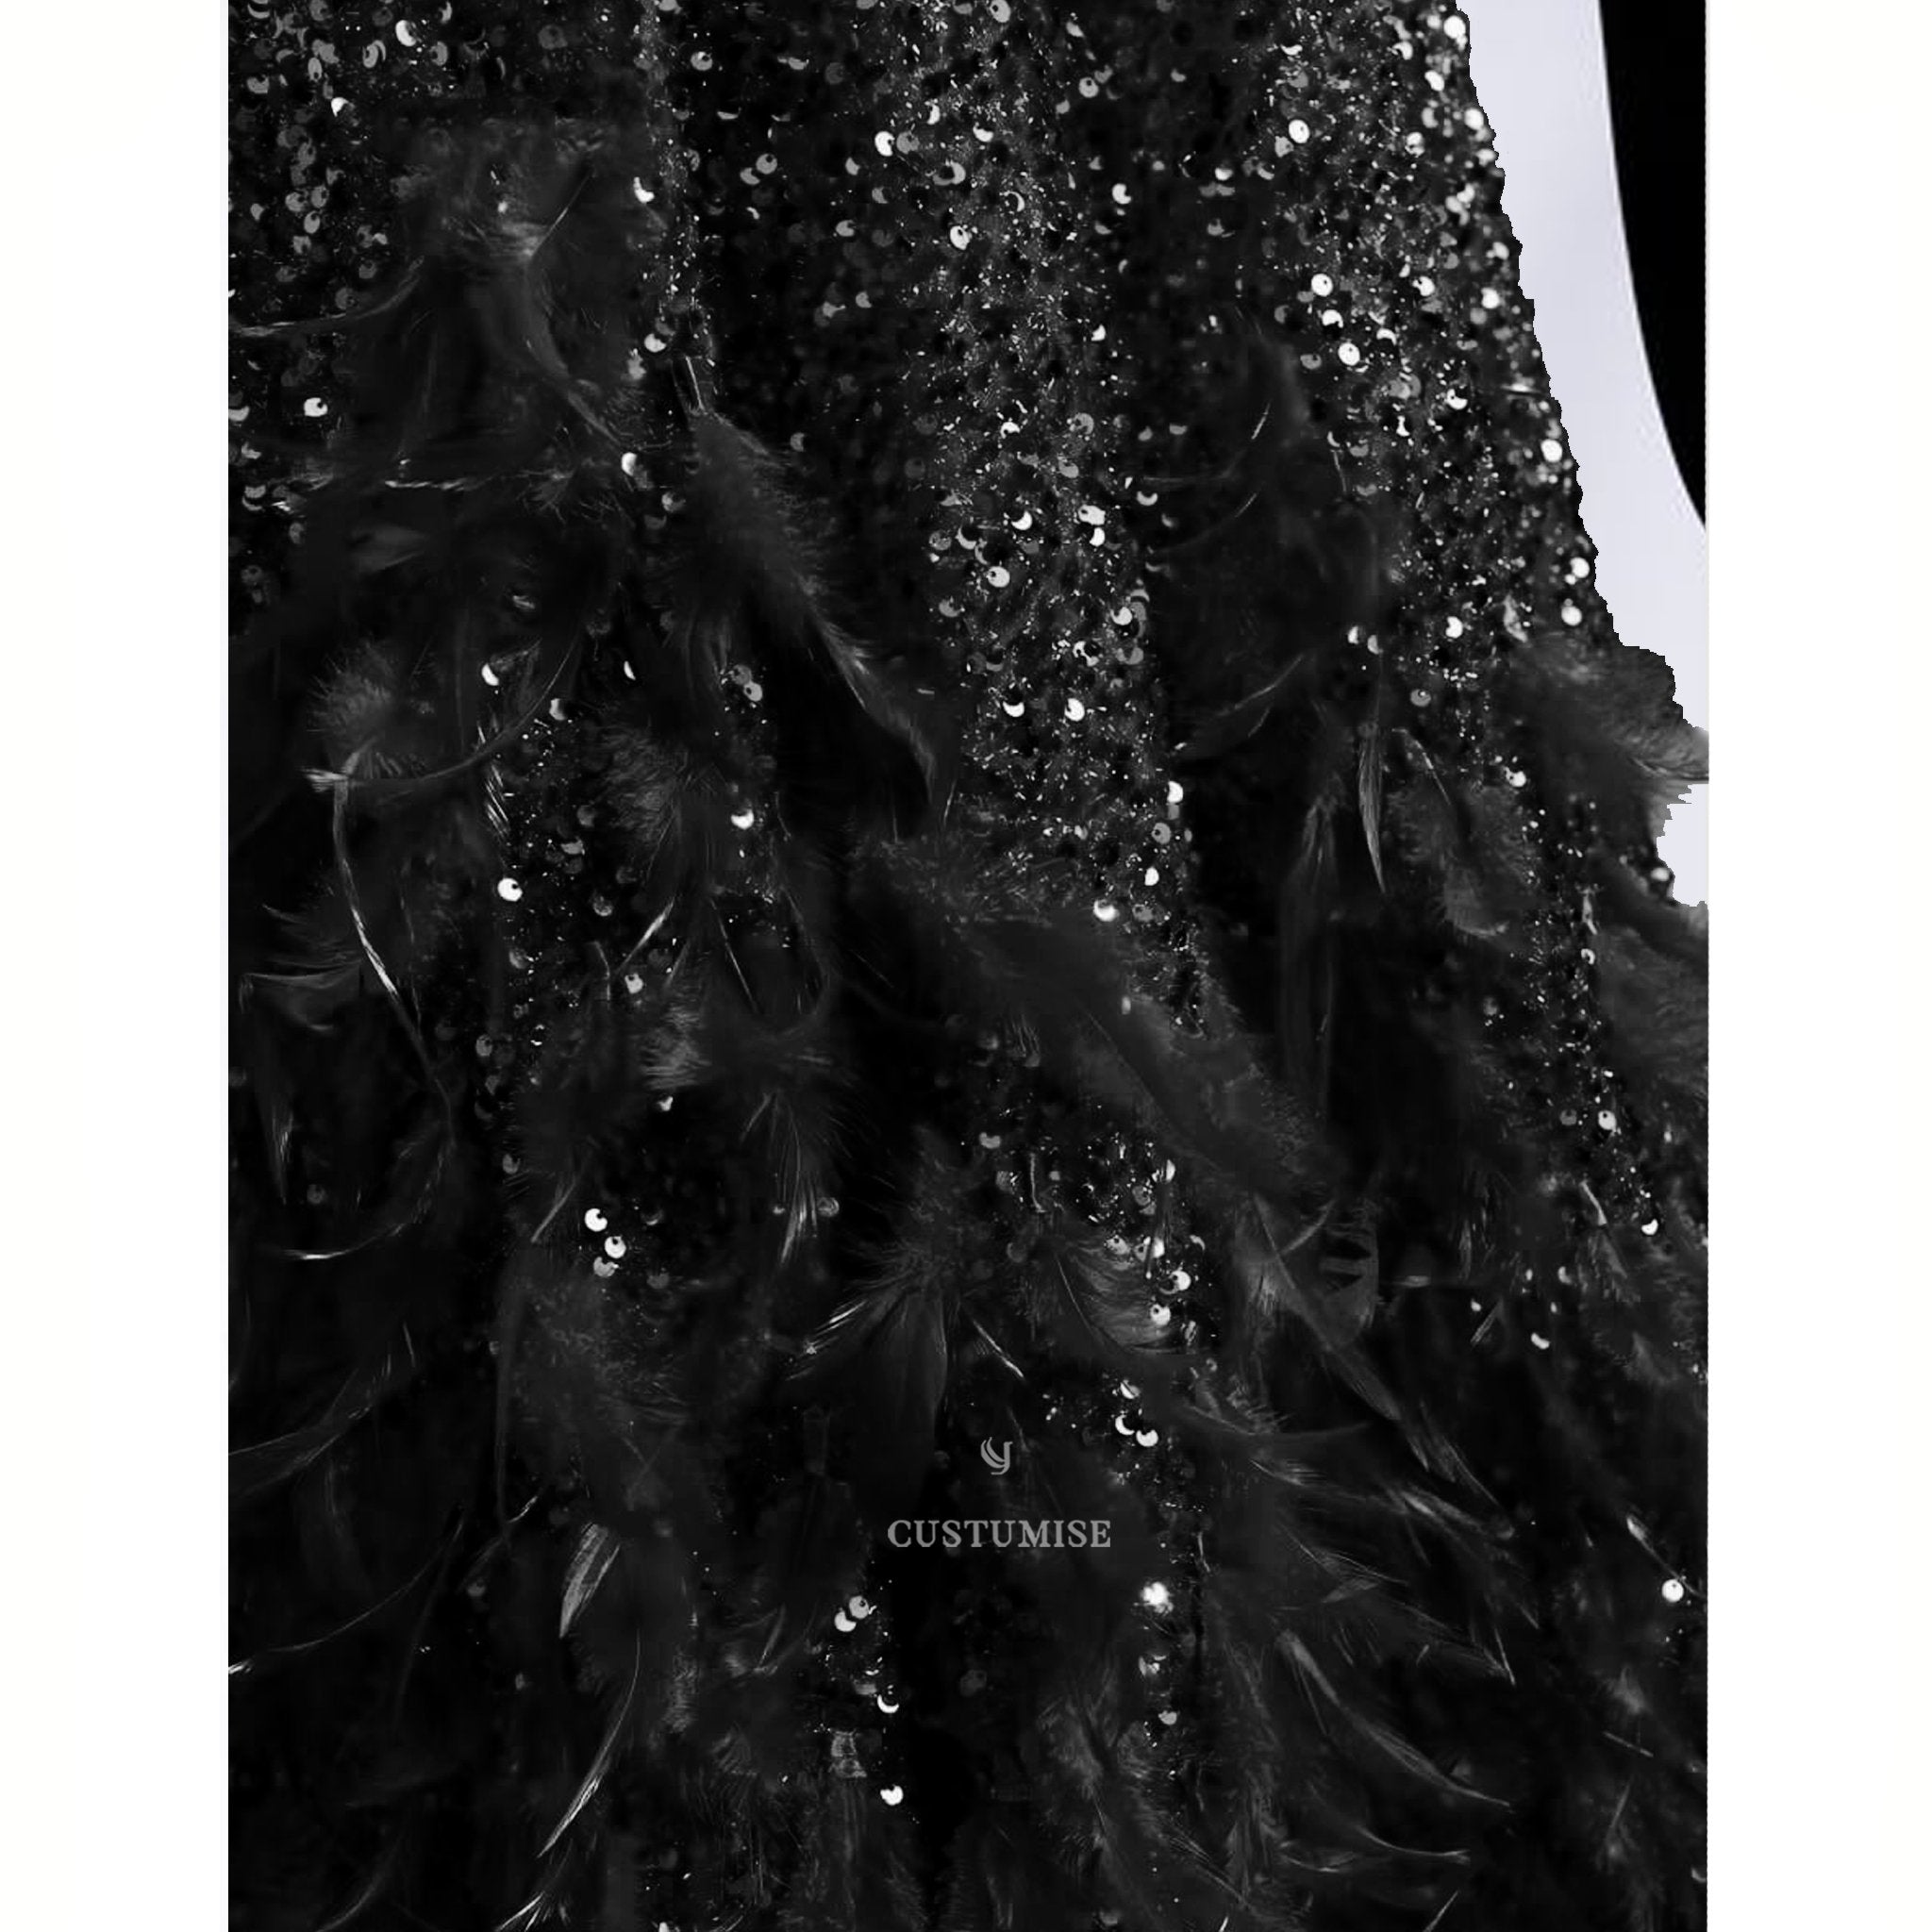 Black Sequenced and Feather gown. - Indian Designer Bridal Wedding Outfit